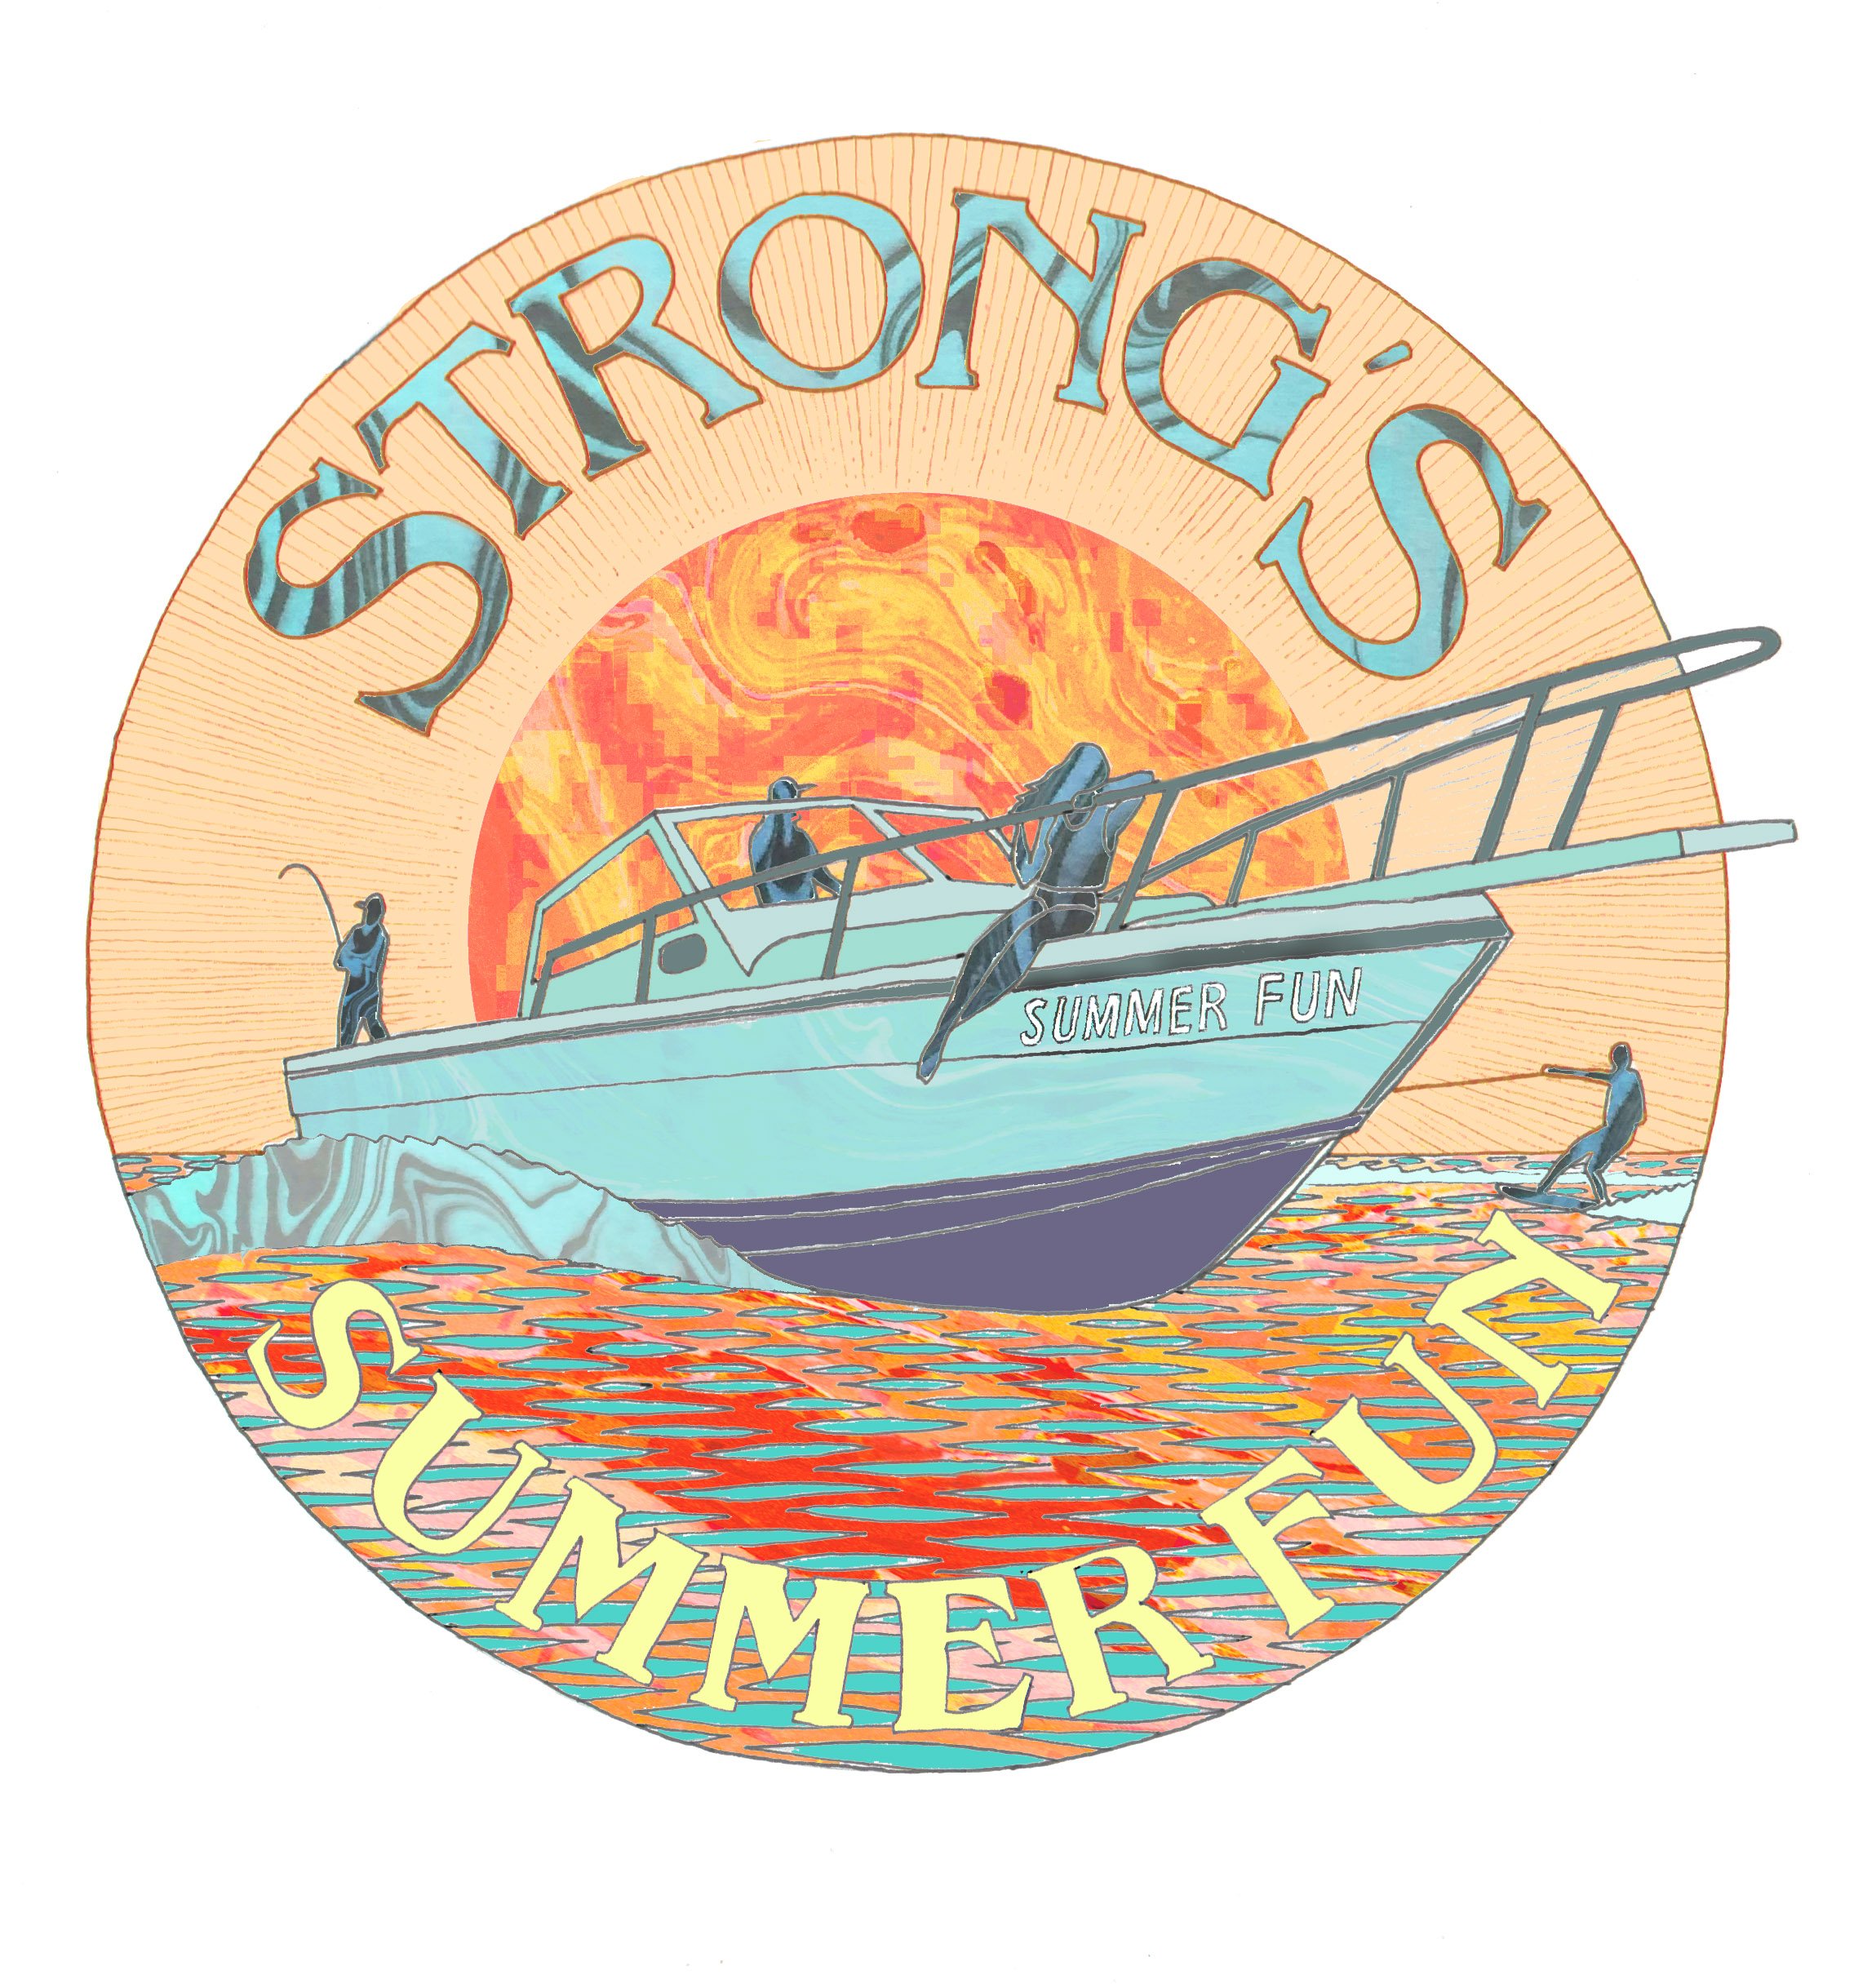    Strongs Summer Fun    graphite and digital  Label for Strong’s Marina limited edition beer release 